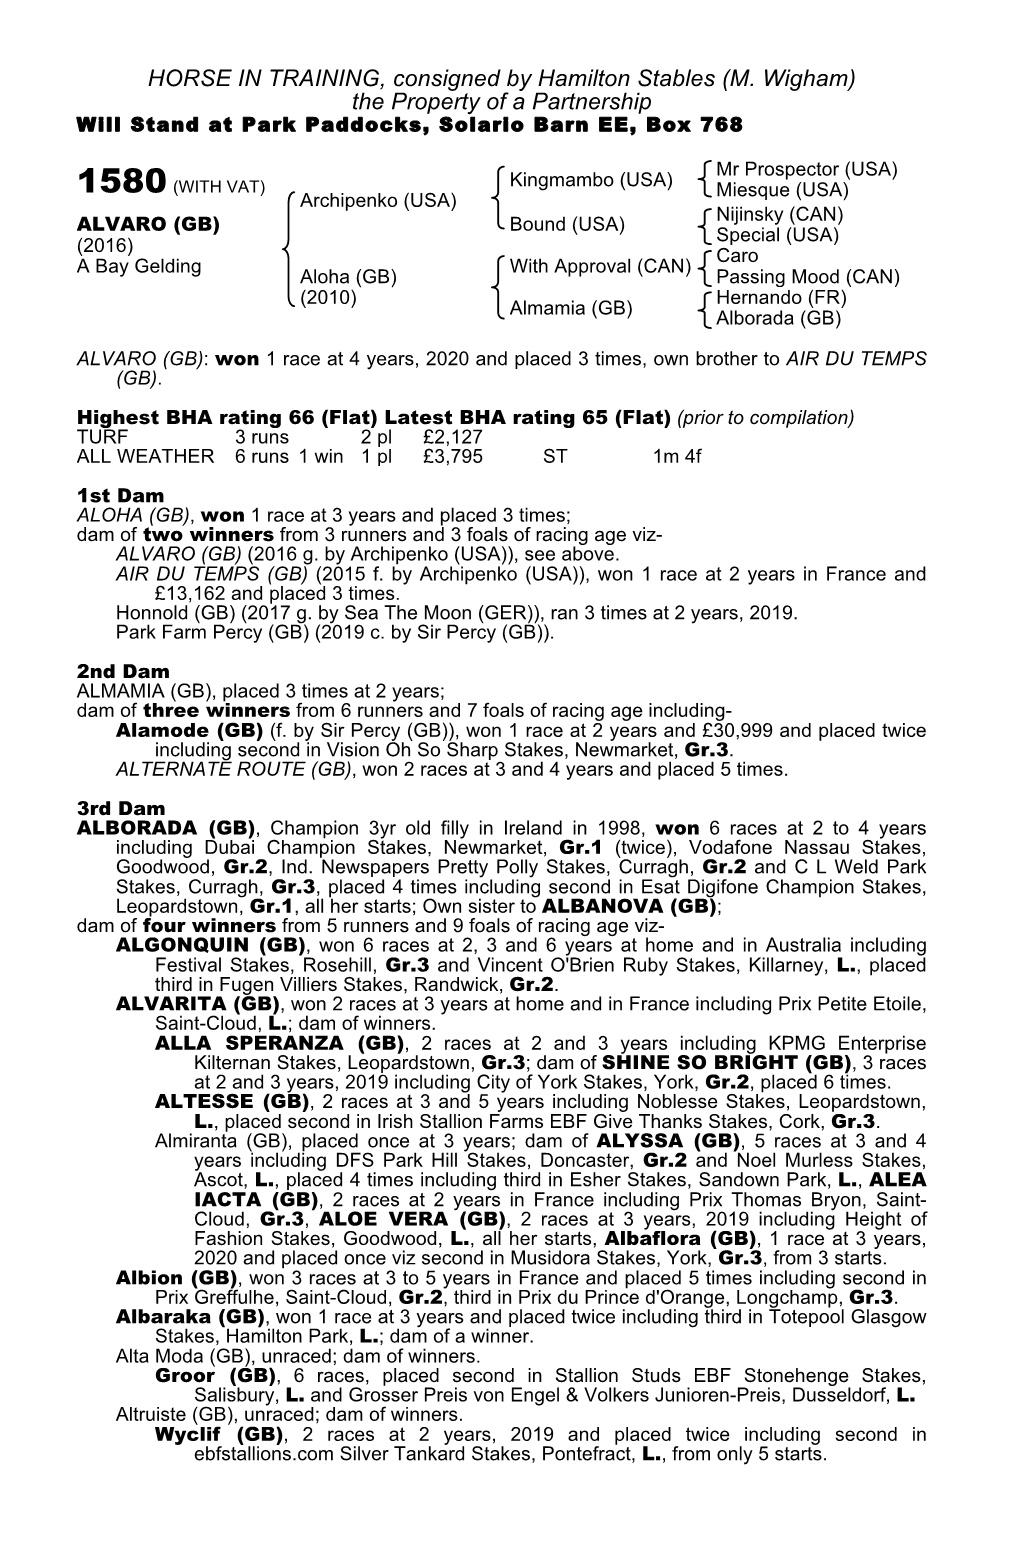 HORSE in TRAINING, Consigned by Hamilton Stables (M. Wigham) the Property of a Partnership Will Stand at Park Paddocks, Solario Barn EE, Box 768